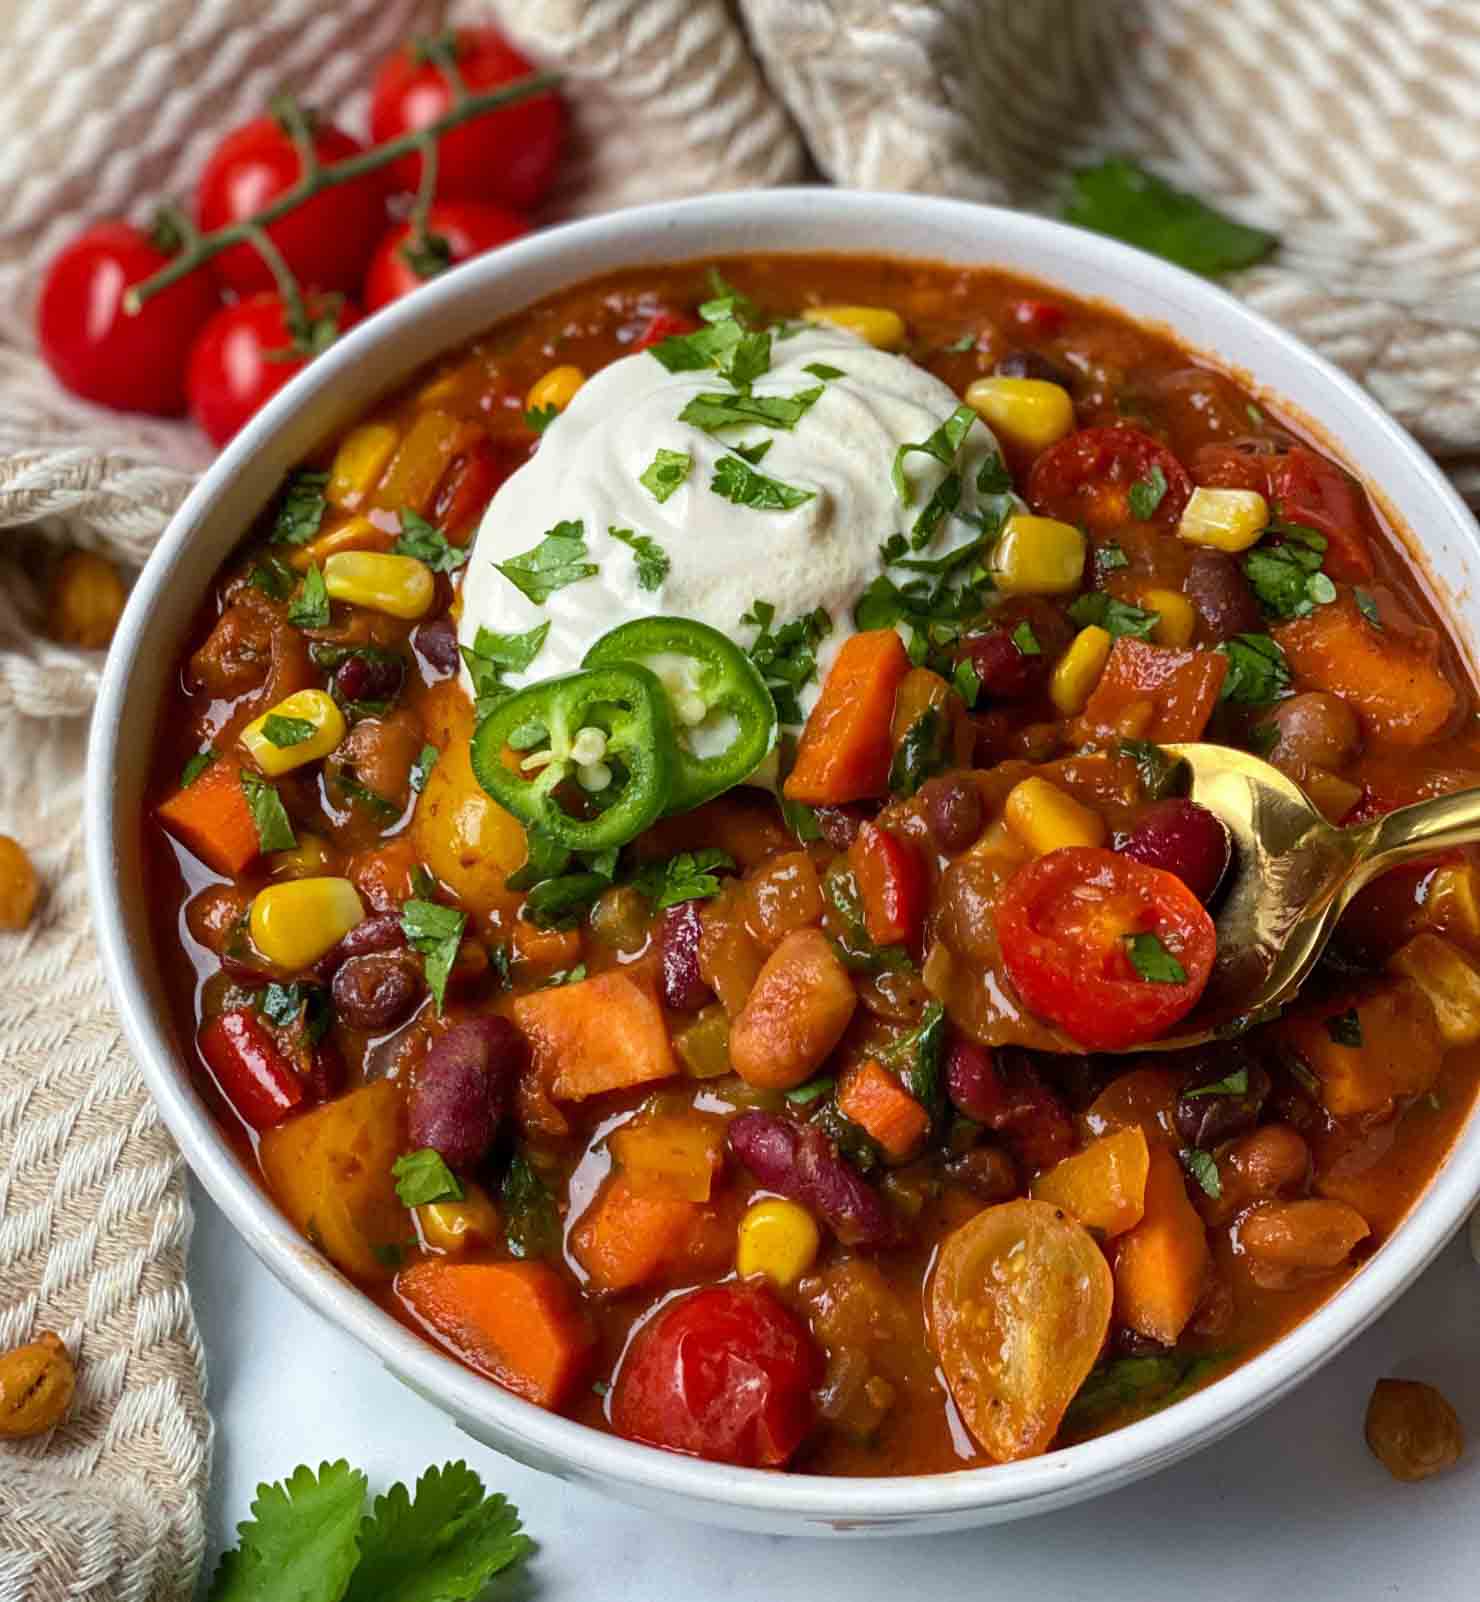 Healthy Vegan Sweet Potato Chili recipe served in a bowl.